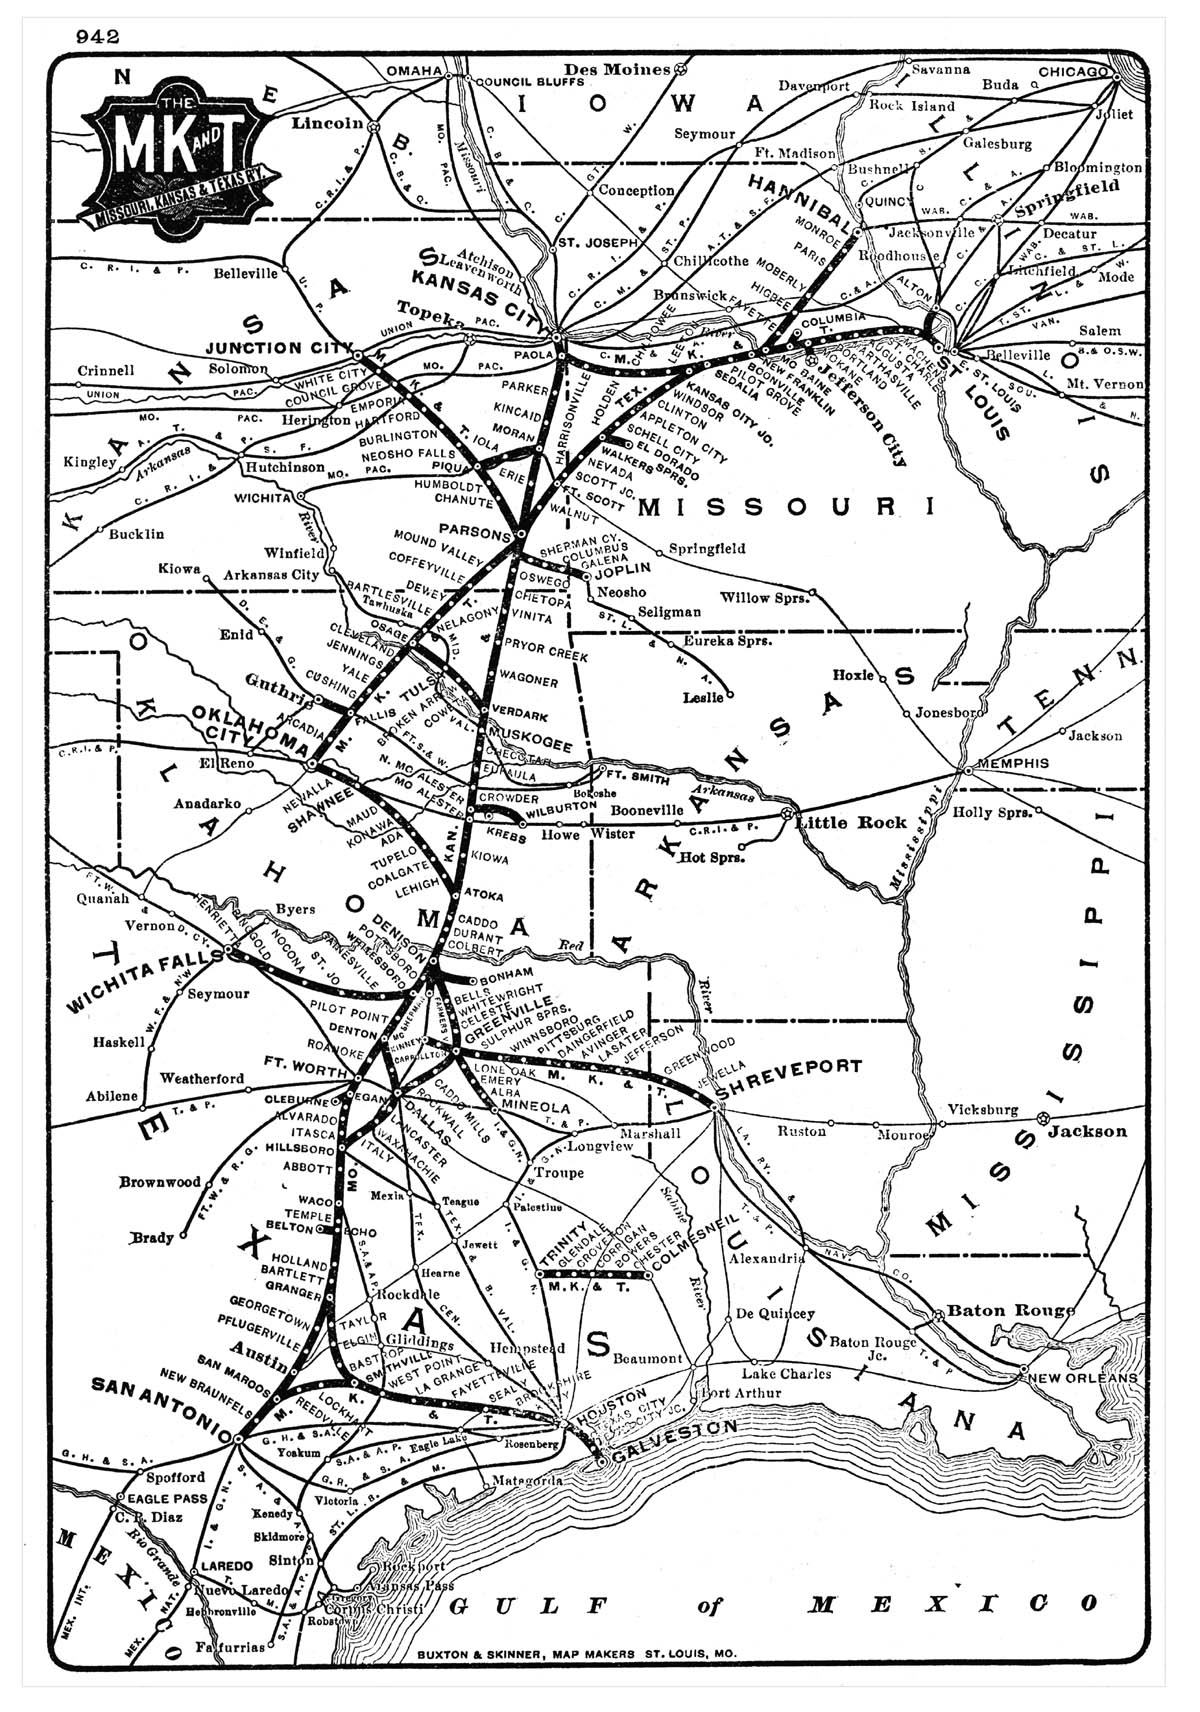 Missouri, Kansas & Texas Railway Company, Station Reference Map Showing Route in 1910.